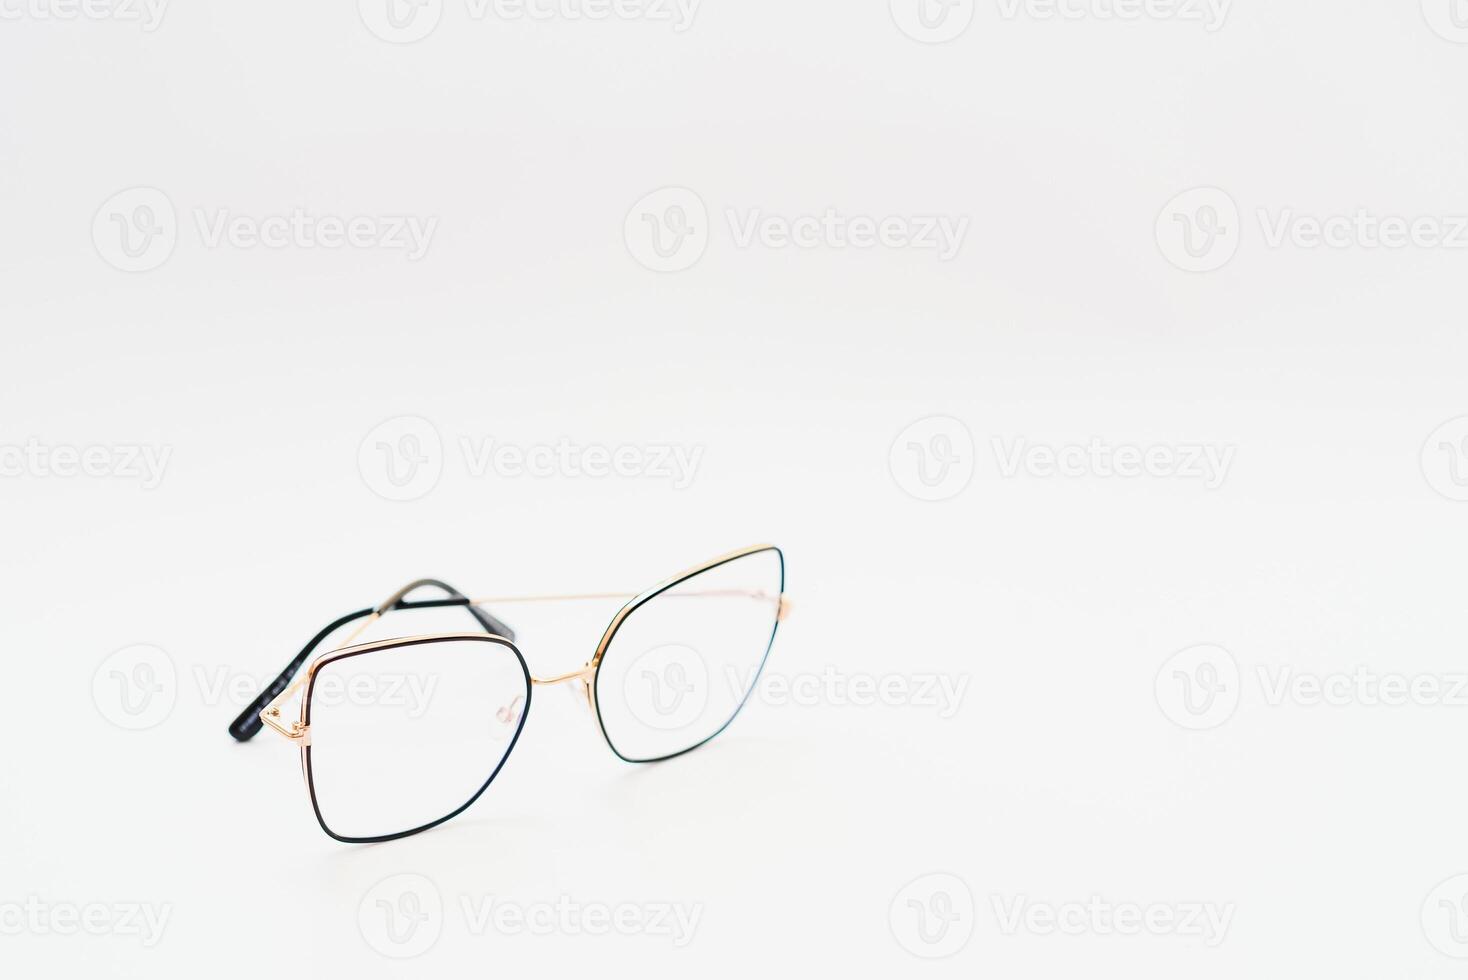 vintage glasses isolated on a white background photo